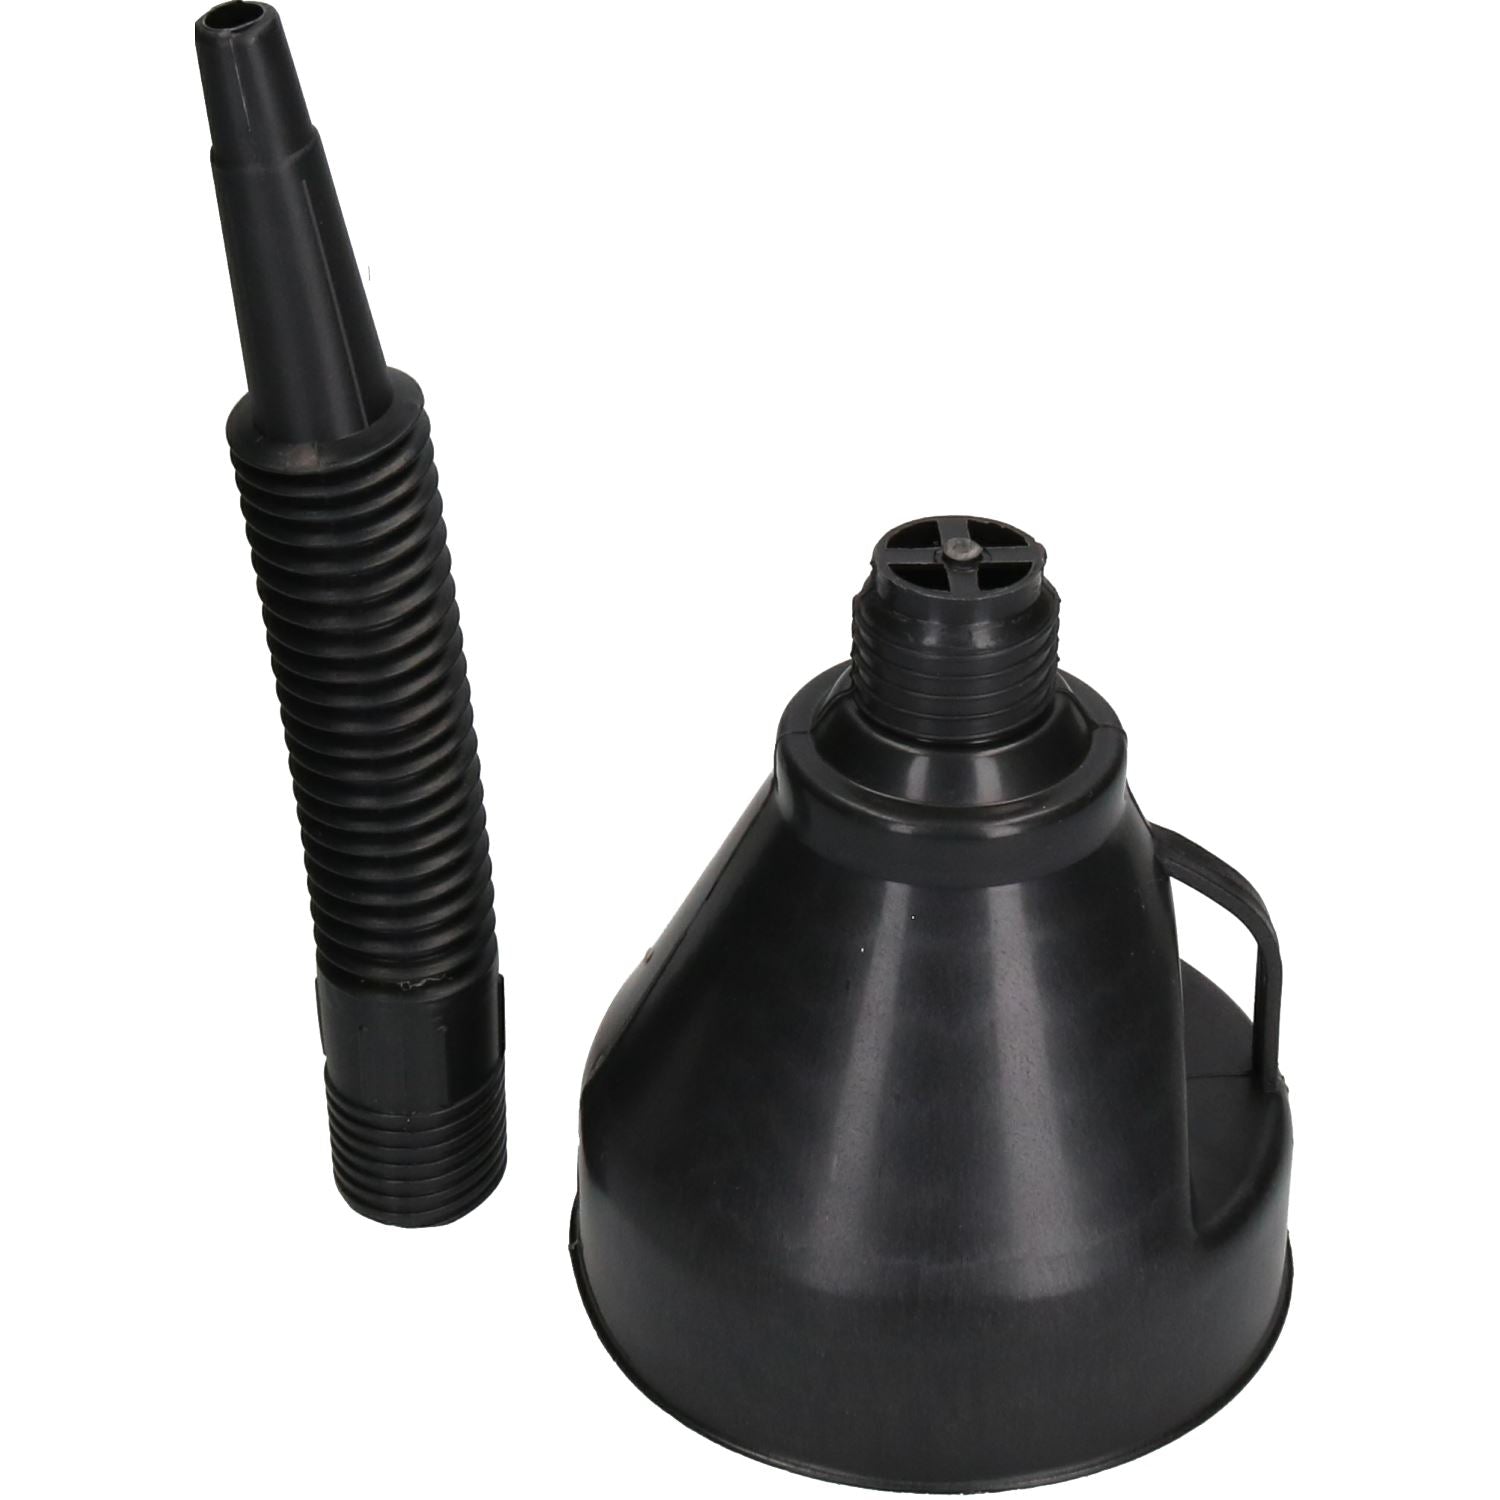 Fuel and Liquid Funnel With Flexible Flexi Spout for Petrol Water Oil